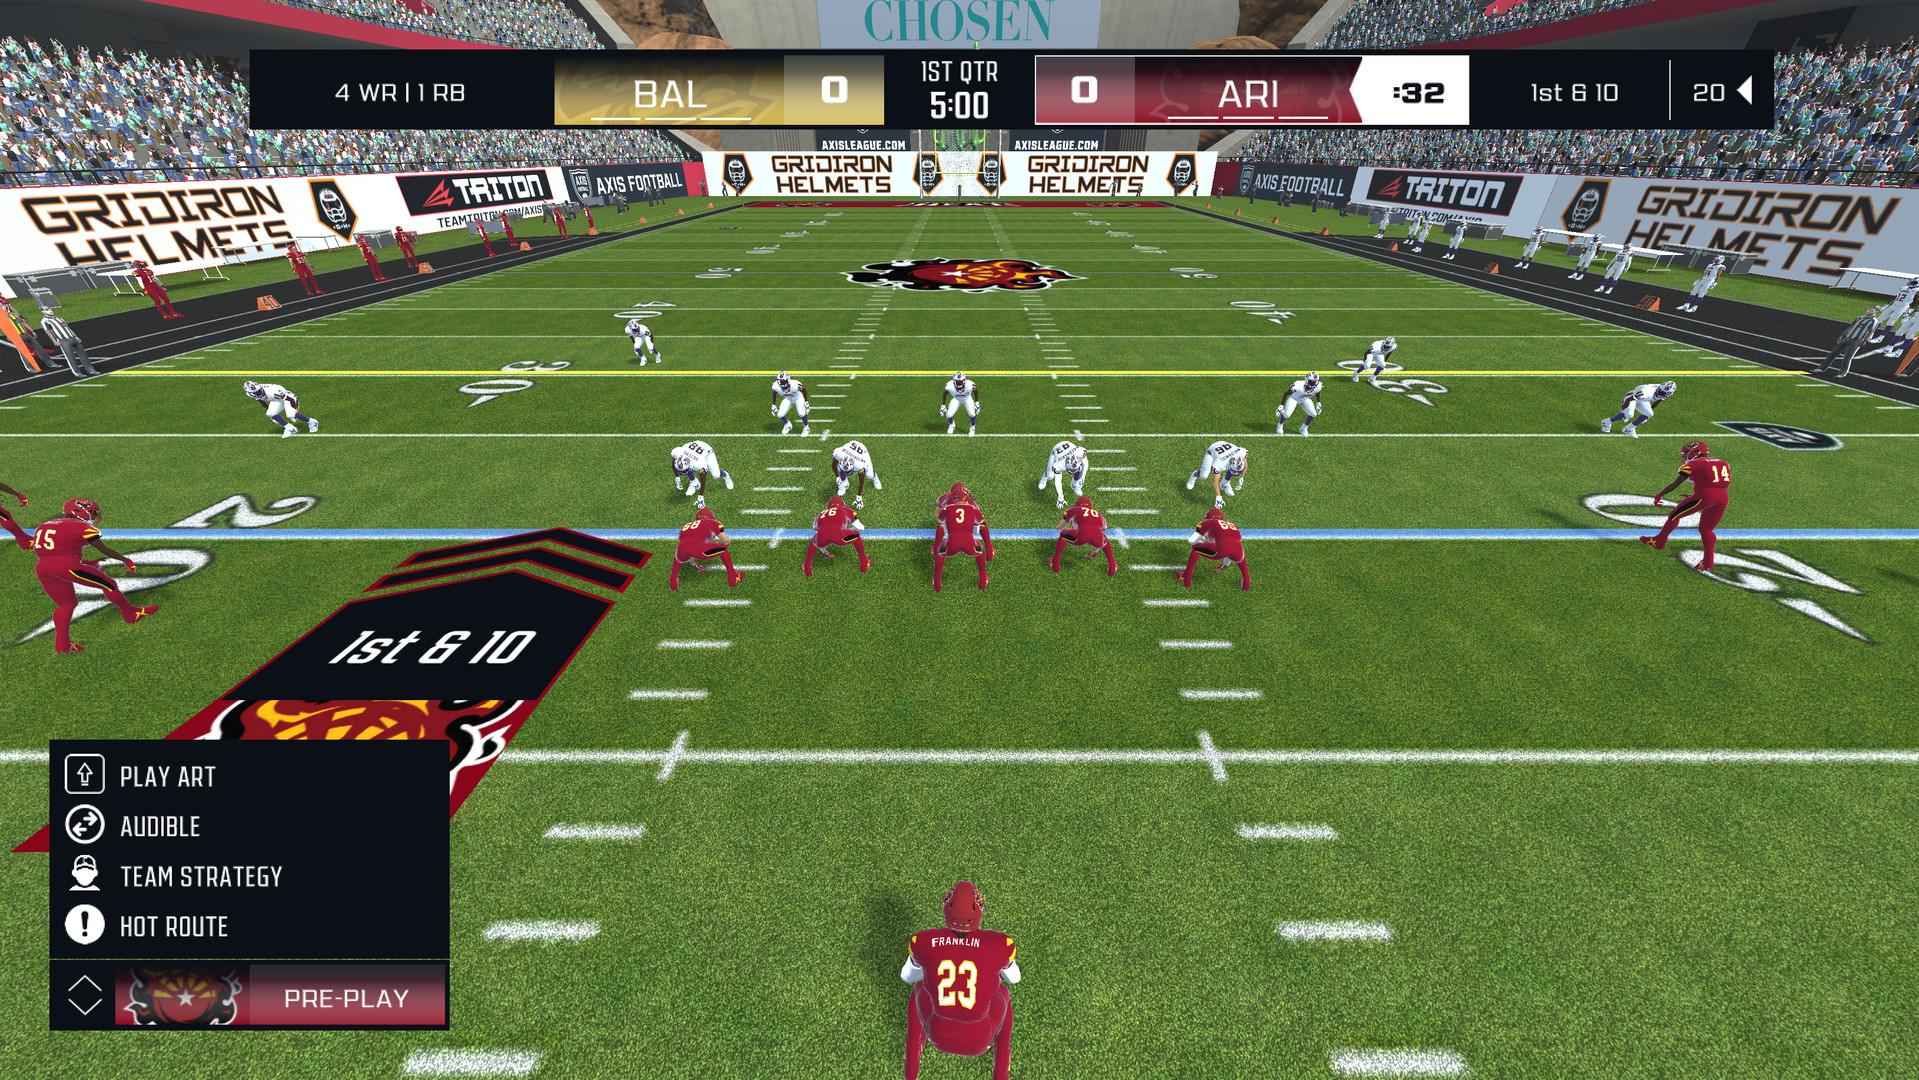 Axis Football 2021 Free Download